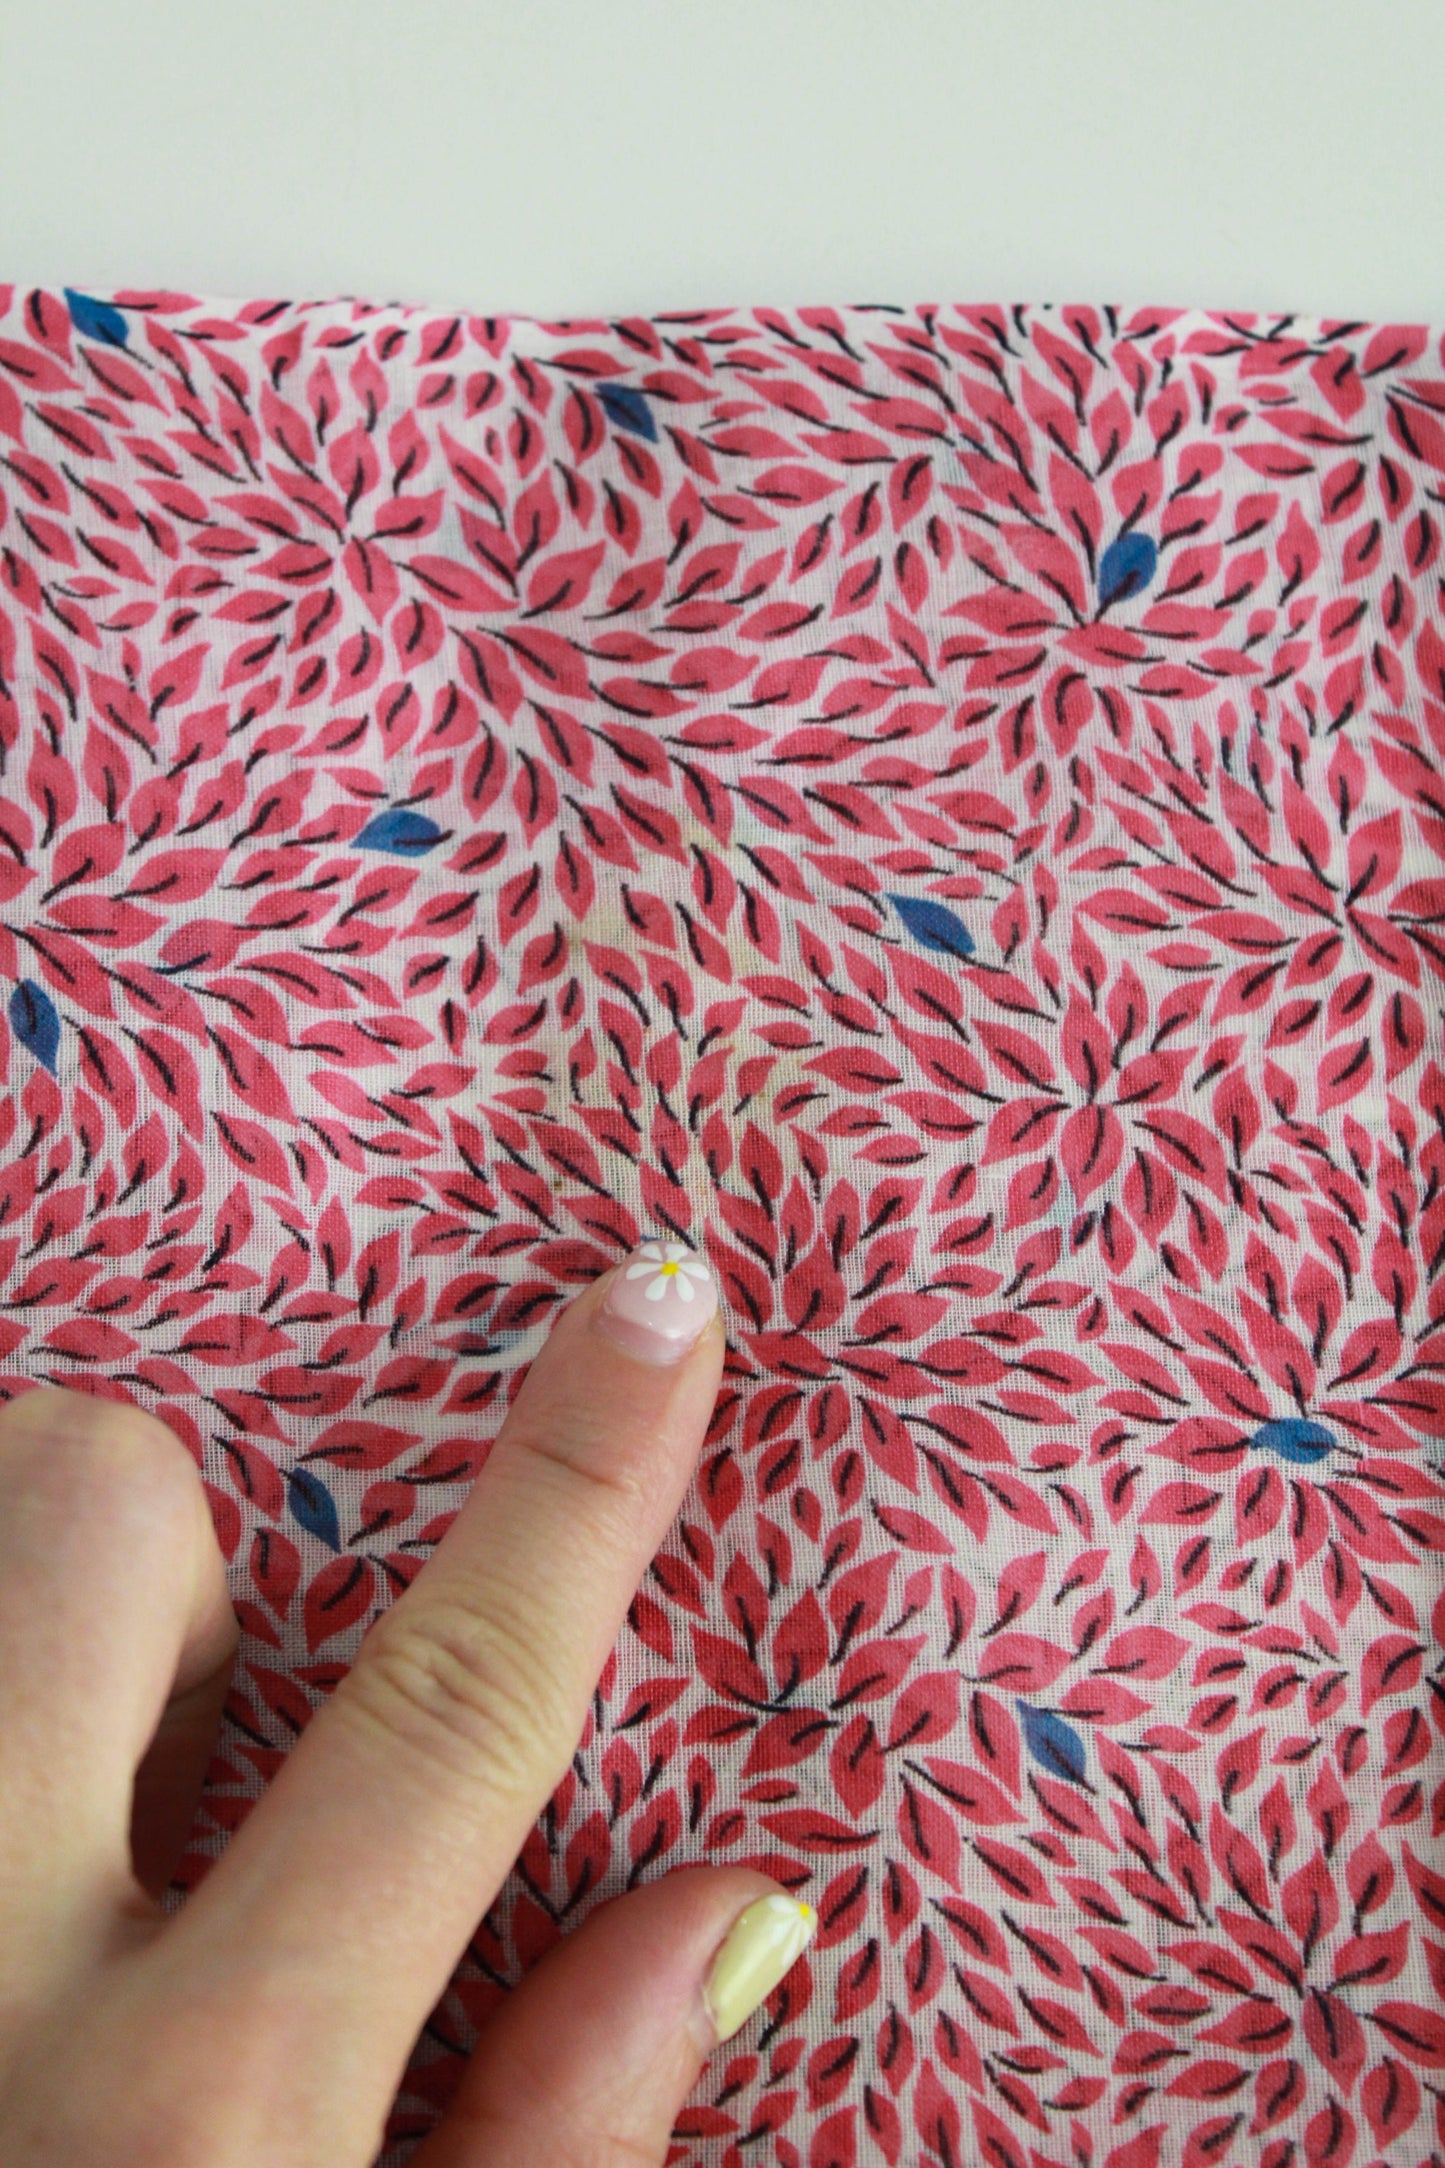 1950s Cotton Fabric, 9 Yards, Pink Abstract Leaf Print Sheer Sewing Fabric